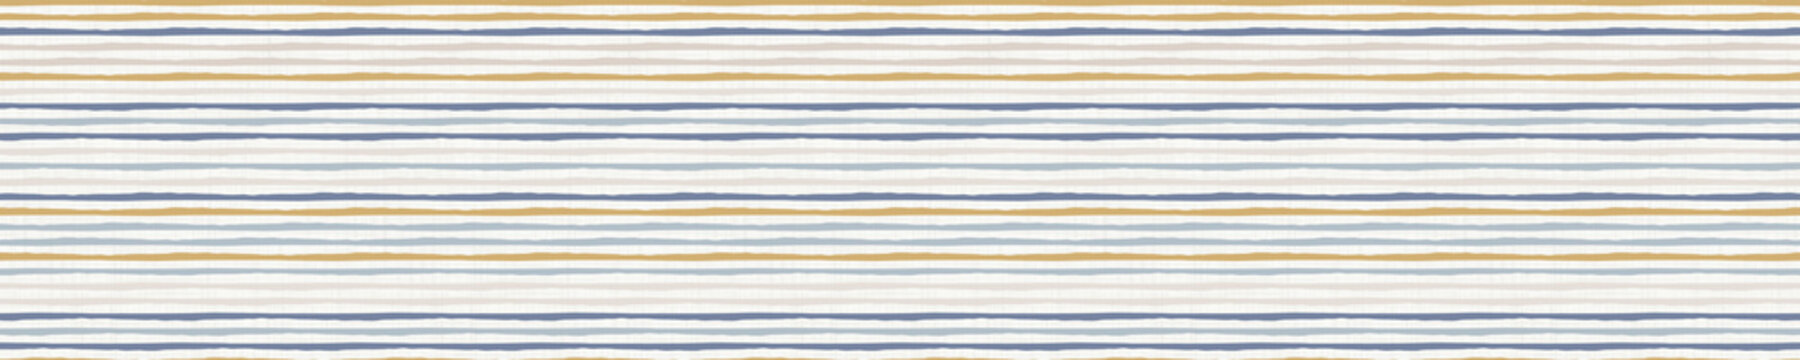 
Seamless French Farmhouse Stripe Pattern. Provence Blue Linen Shabby Chic Style. Hand Drawn Texture. Yellow Blue Background. Doodle Line Wallpaper Home Decor Swatch. Modern Textile All Over Print